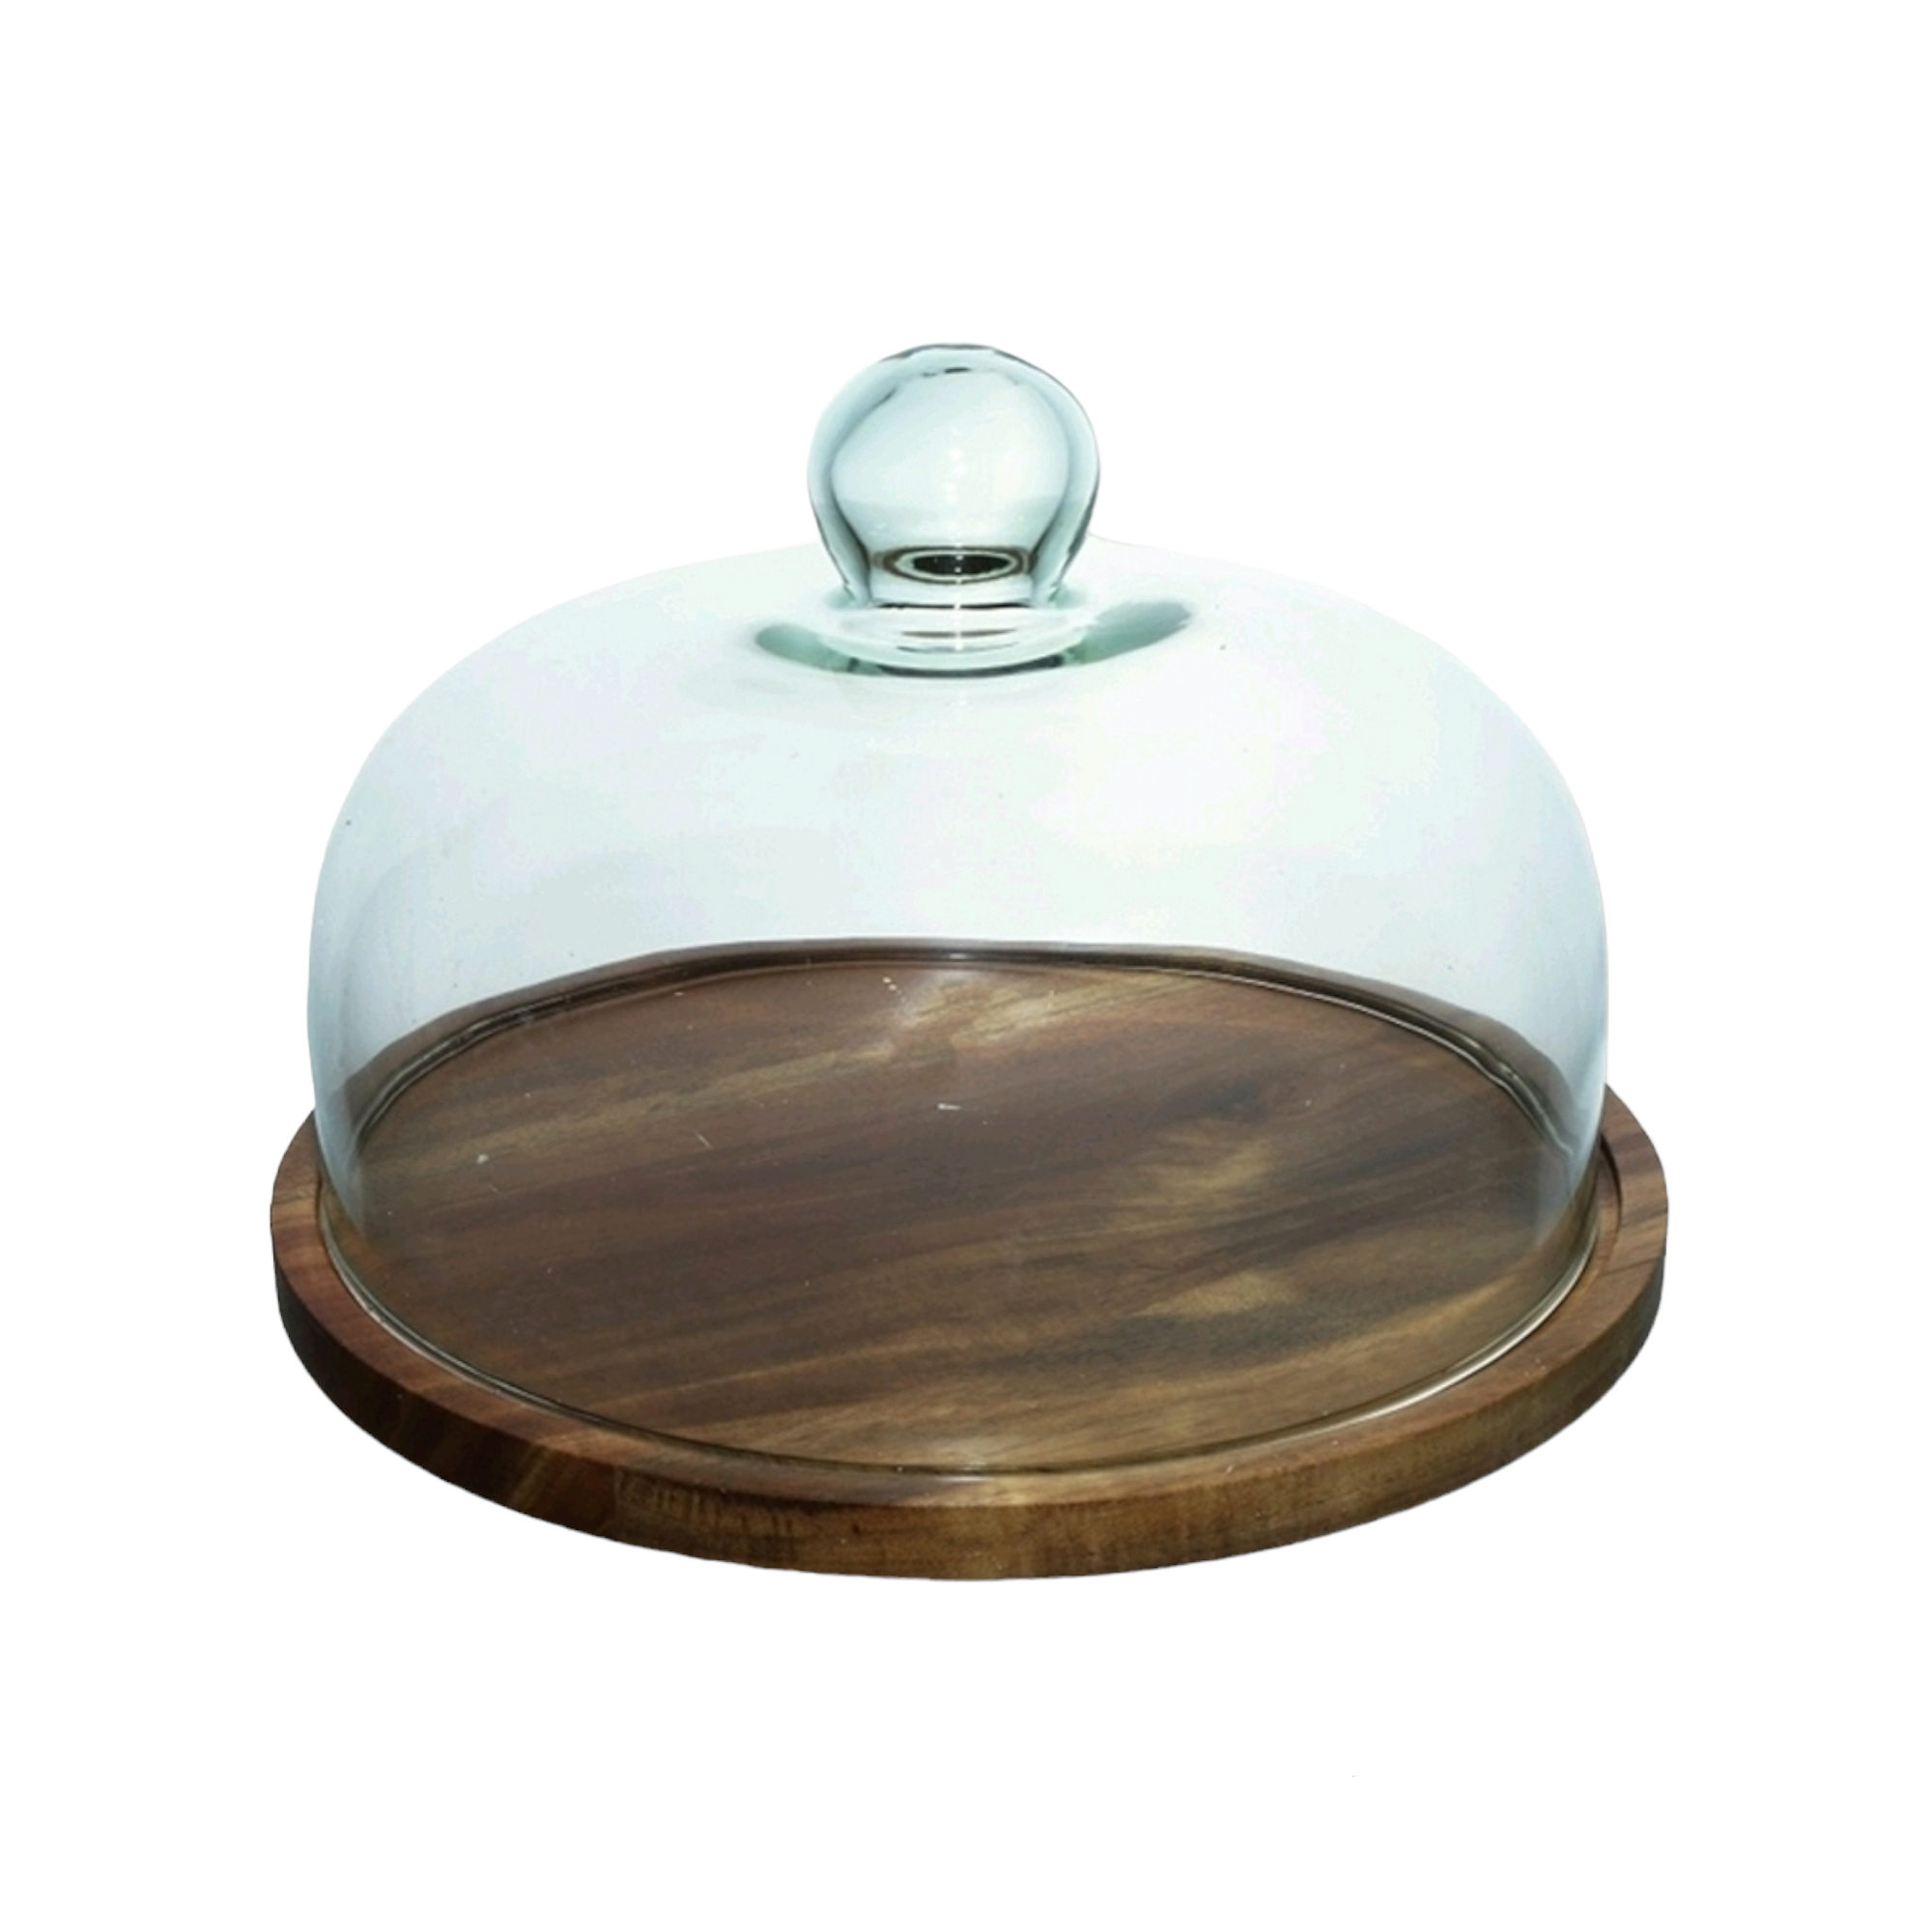 Glass Patisserie Cake Dome Server with Acacia Base Turntable 34564